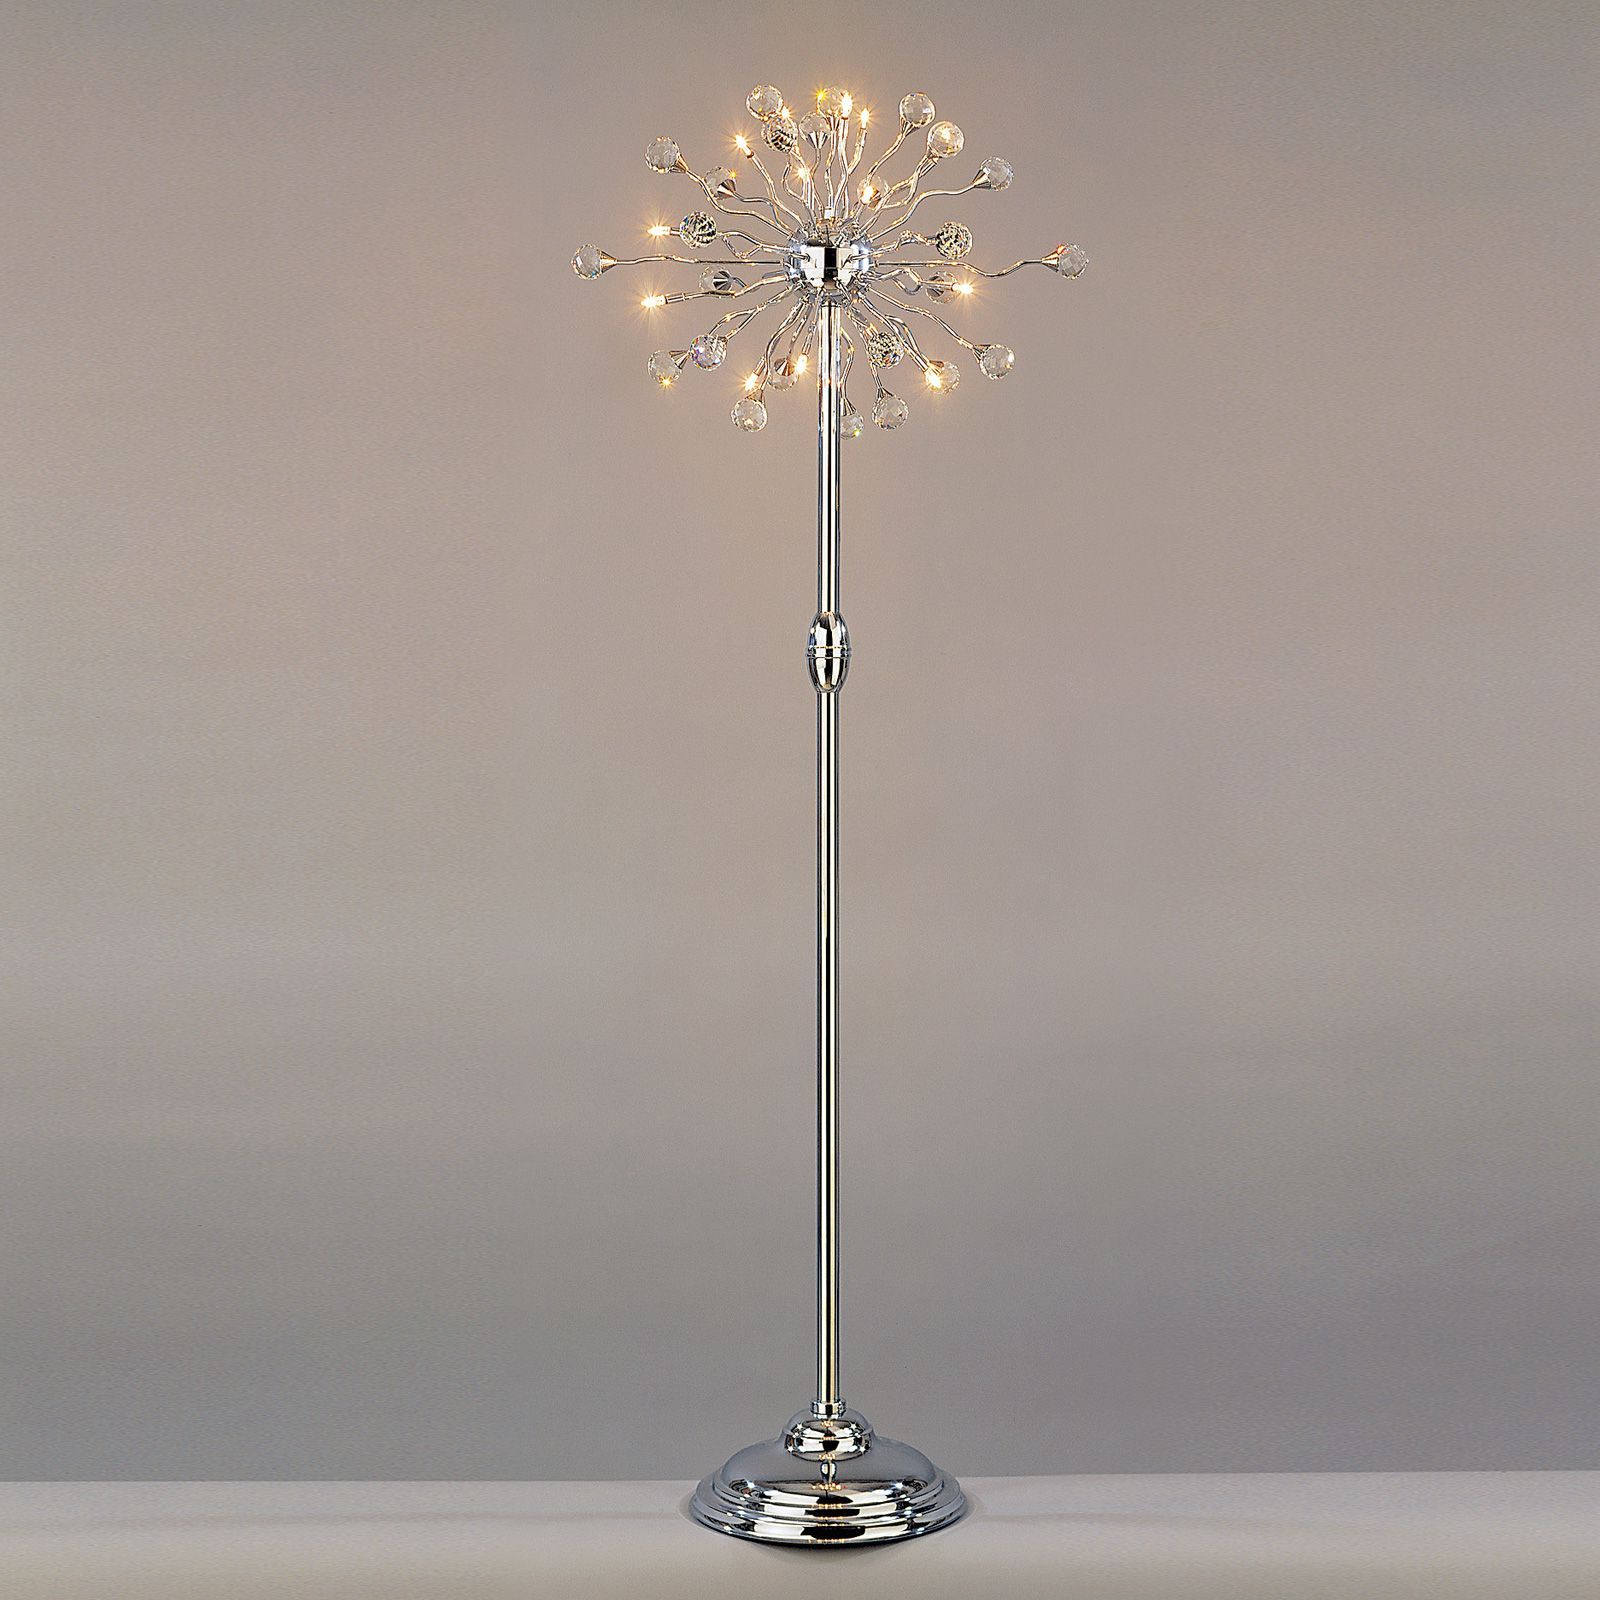 2019 Chrome Standing Lamps With Floor Lamp Galaxy, Chrome – Color: Chrome (View 11 of 15)